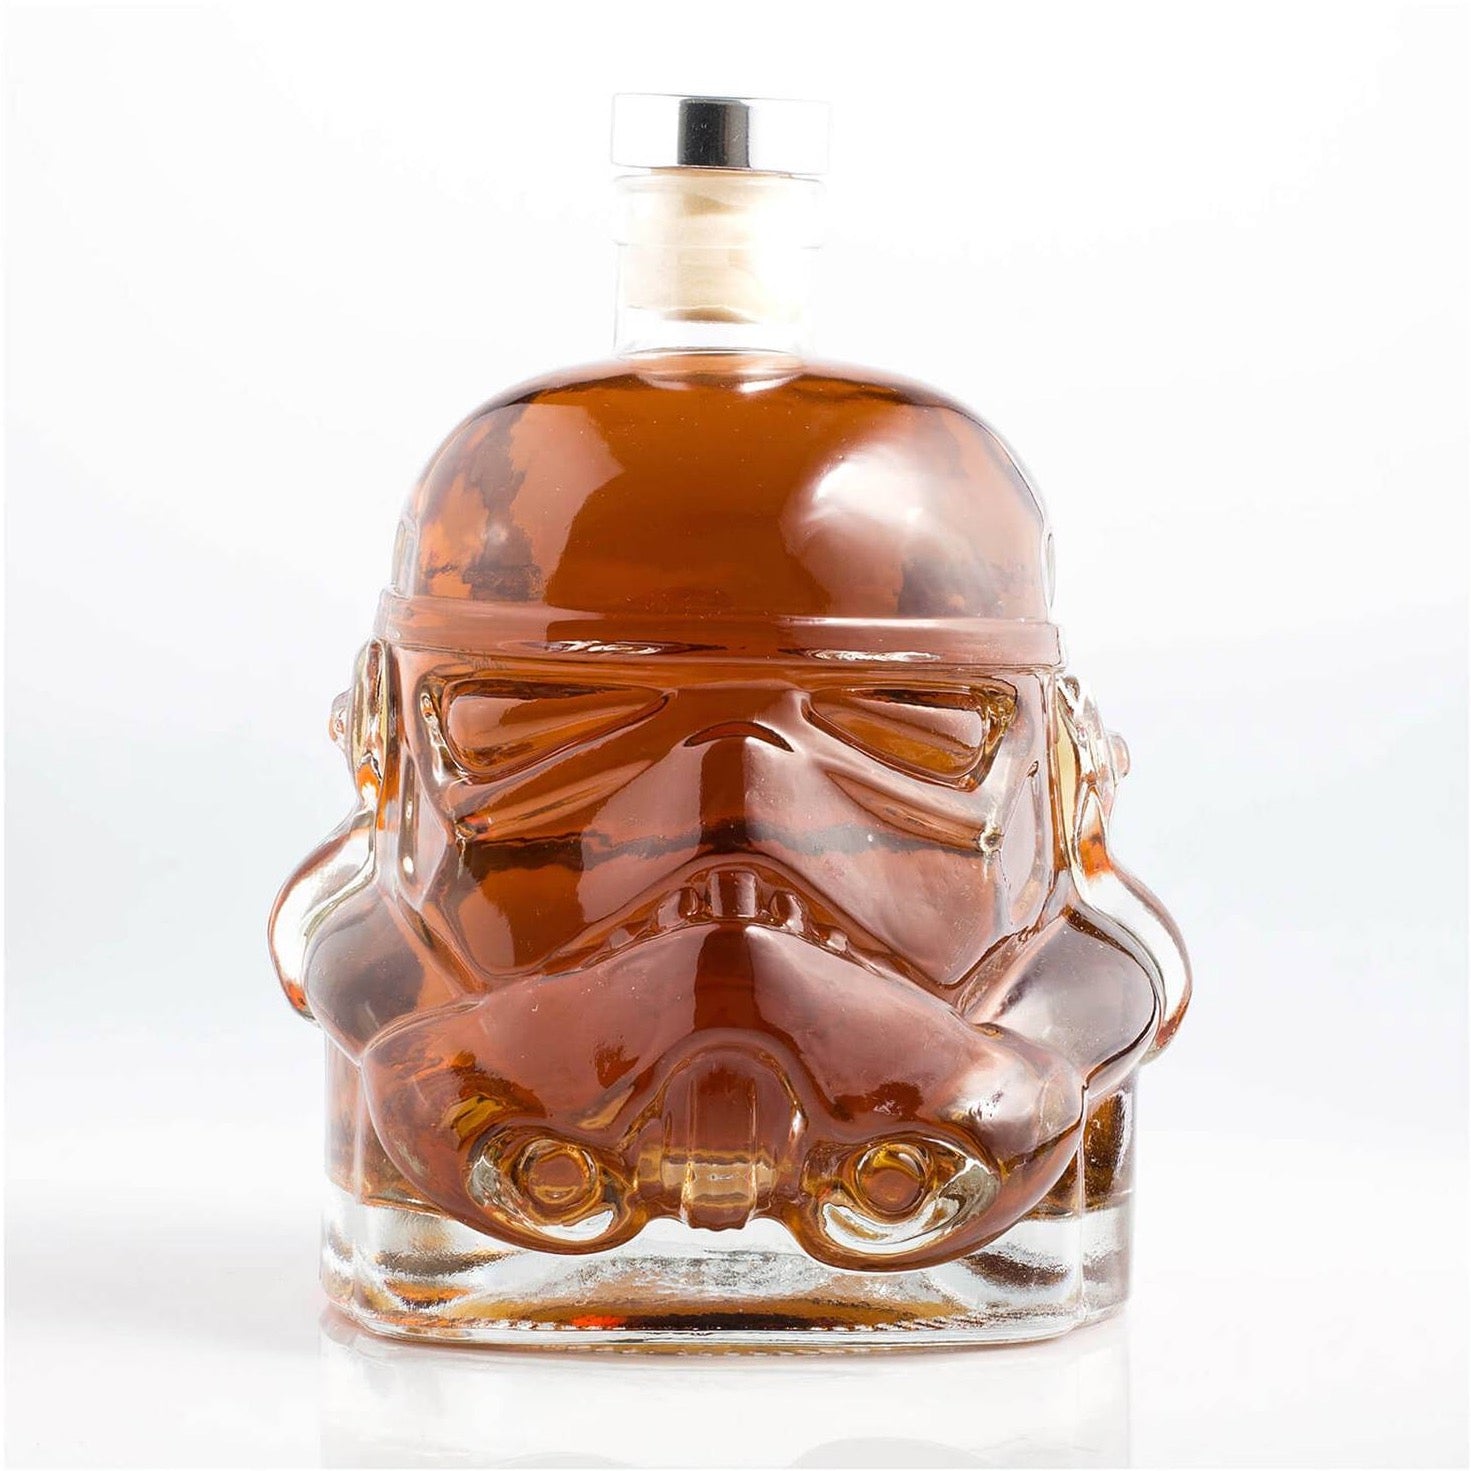 Buy STAR WARS: Stormtrooper Bottle Decanter Set with 2 Glasses, Whiskey  Carafe, for Whiskey, Vodka, and Wine, 680ml by Destiny's Gift Inc. on  OpenSky